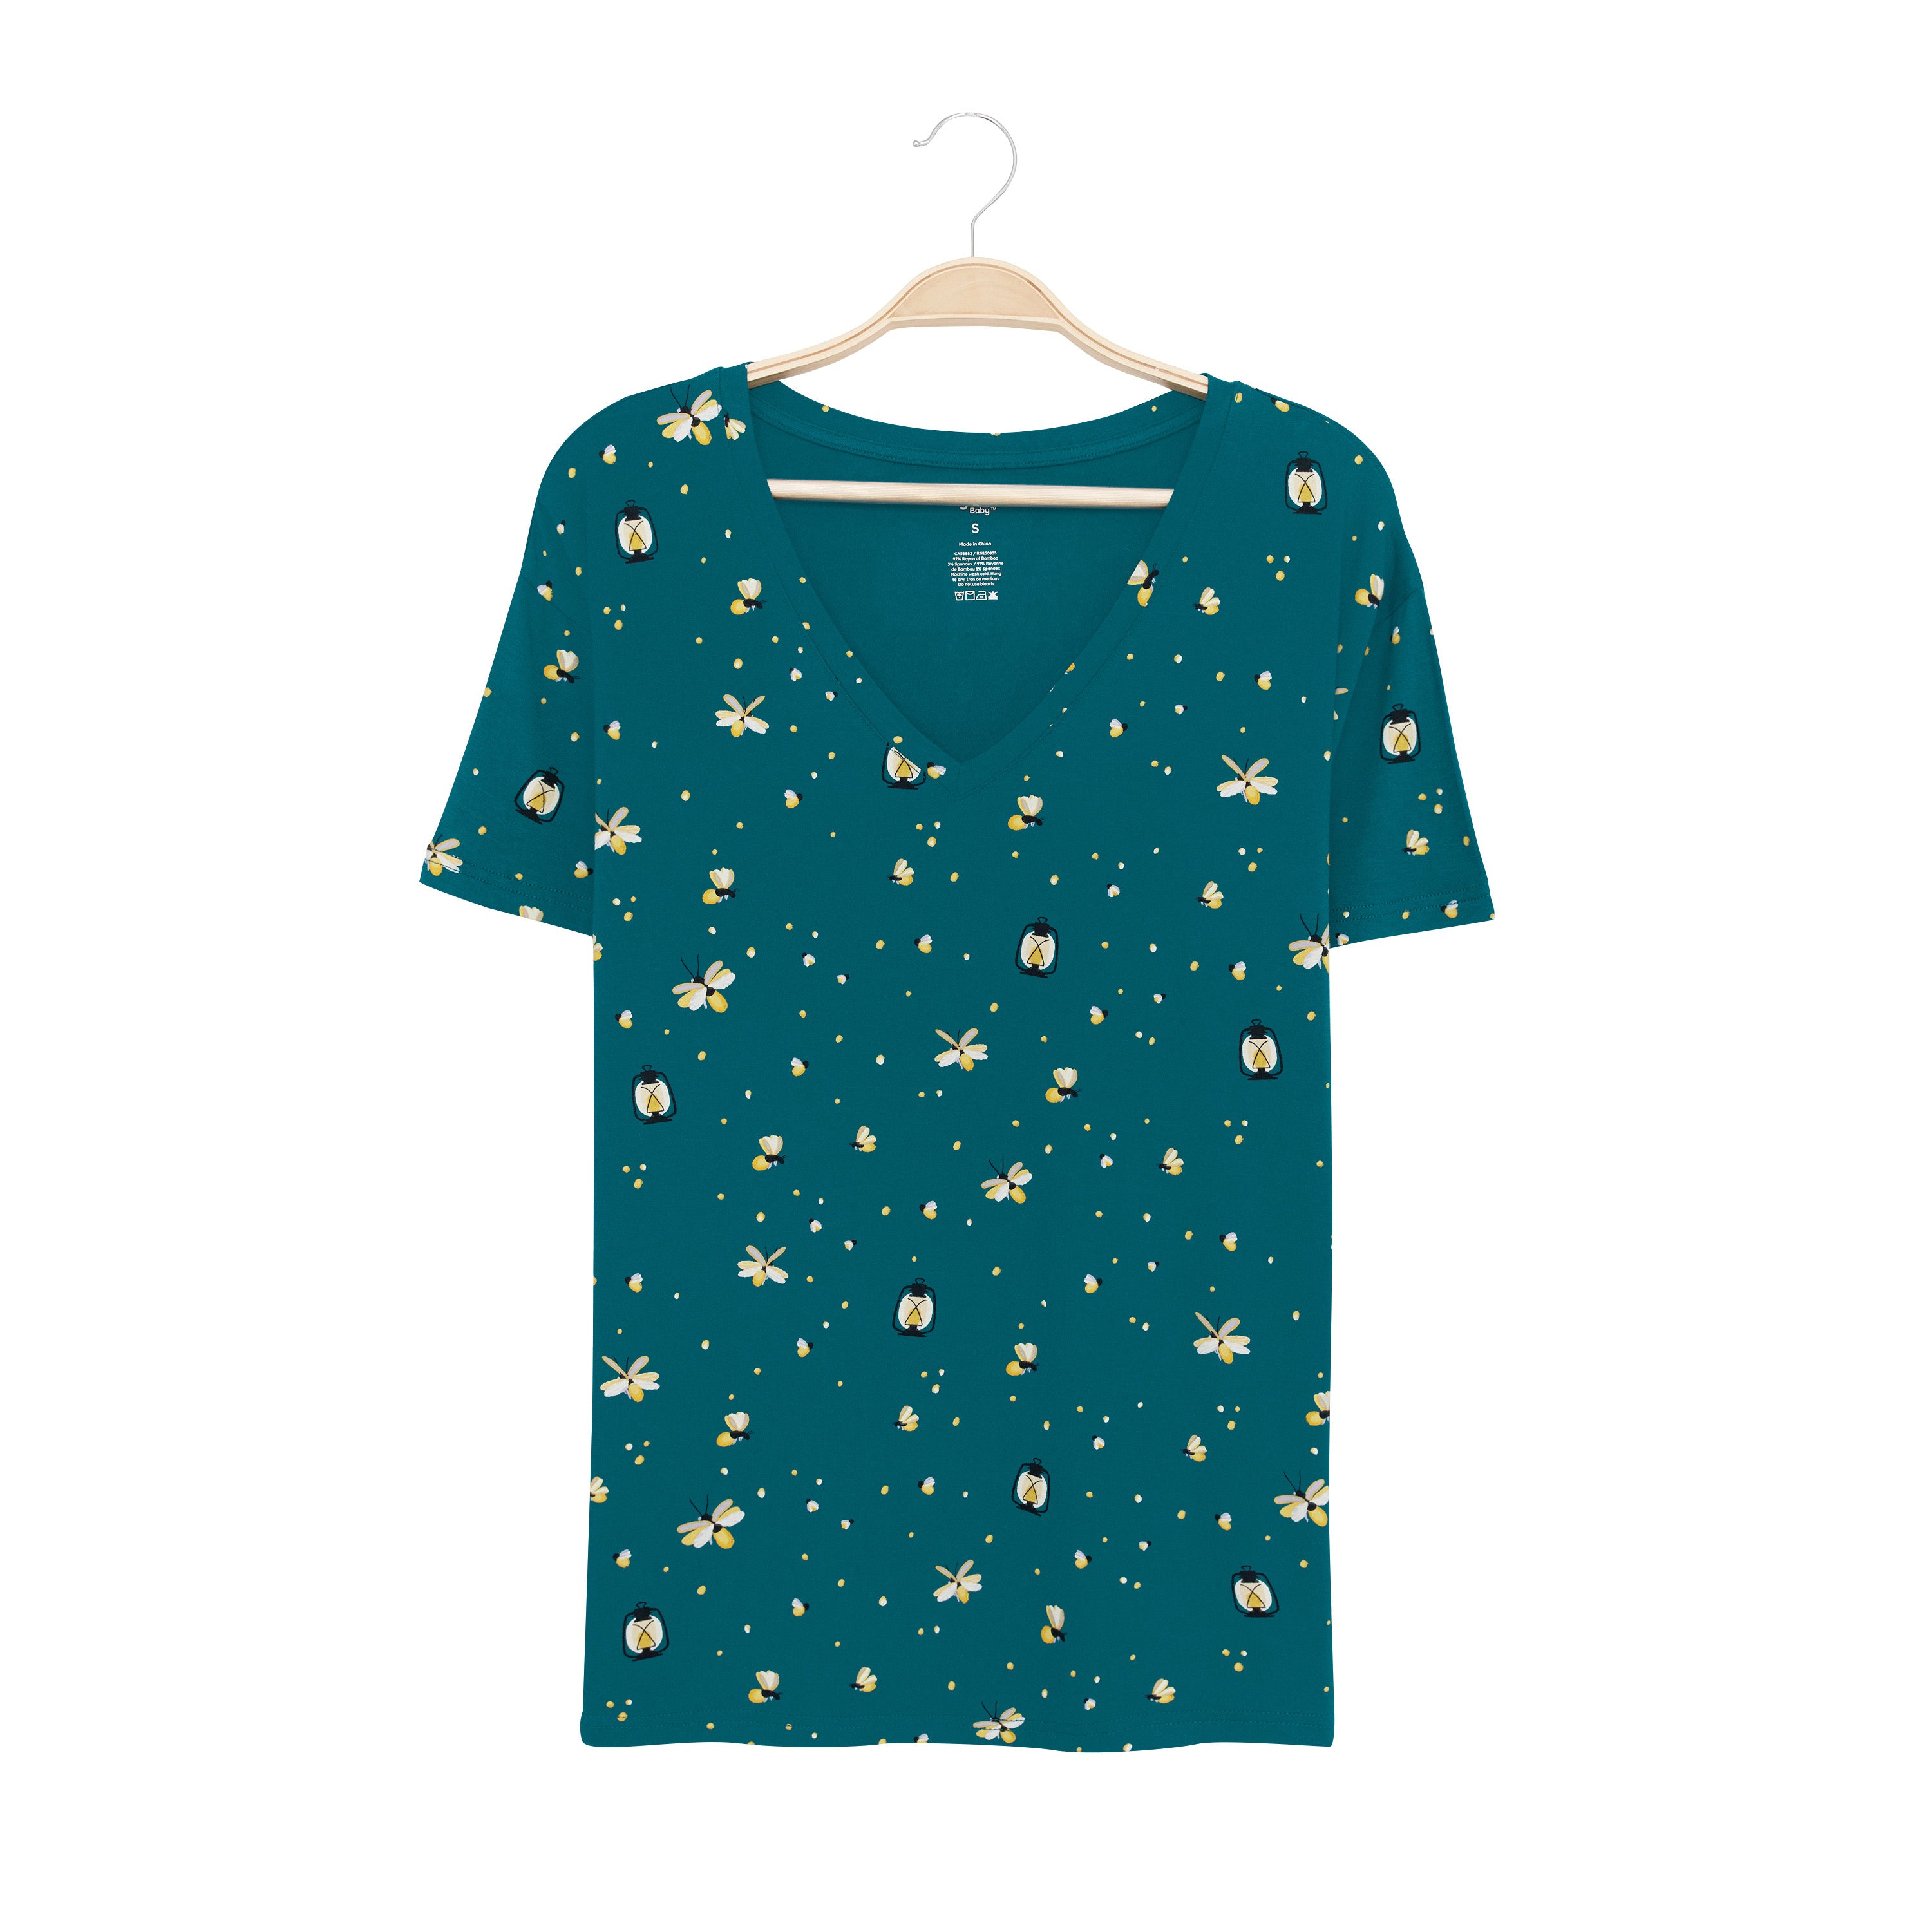 Women’s Relaxed Fit V-Neck in Firefly